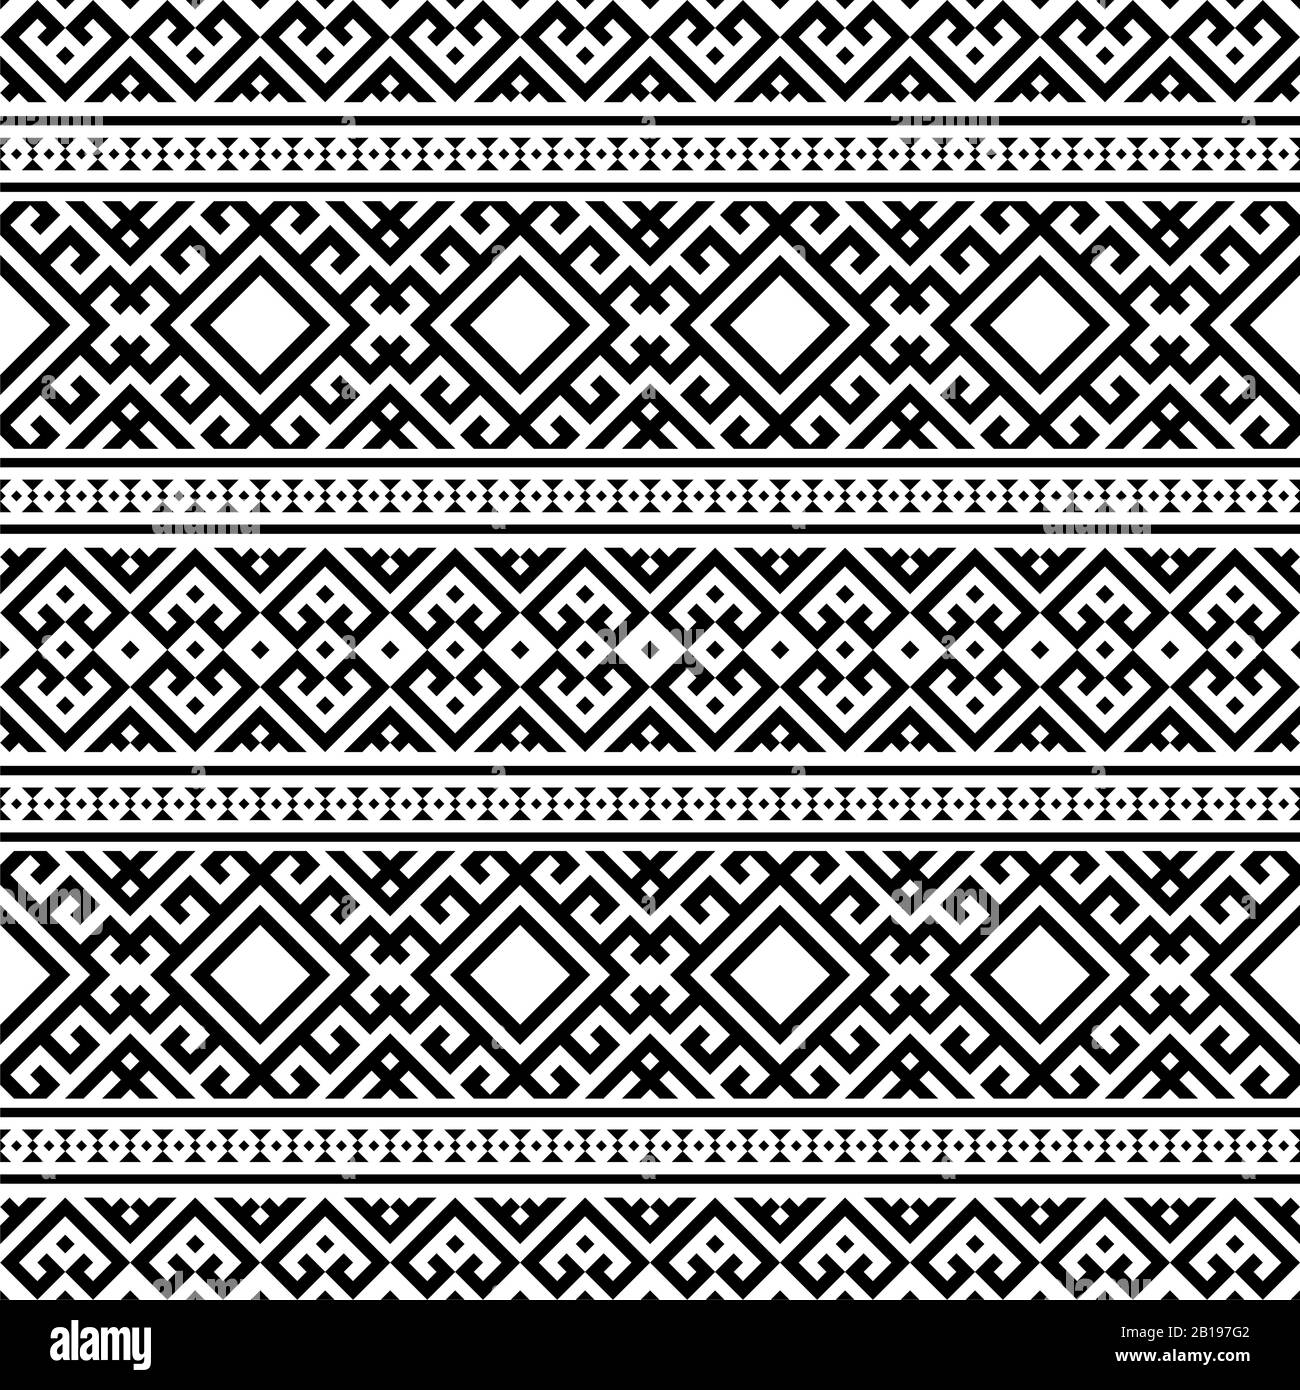 Seamless Ethnic Pattern Illustration vector with tribal design in black ...